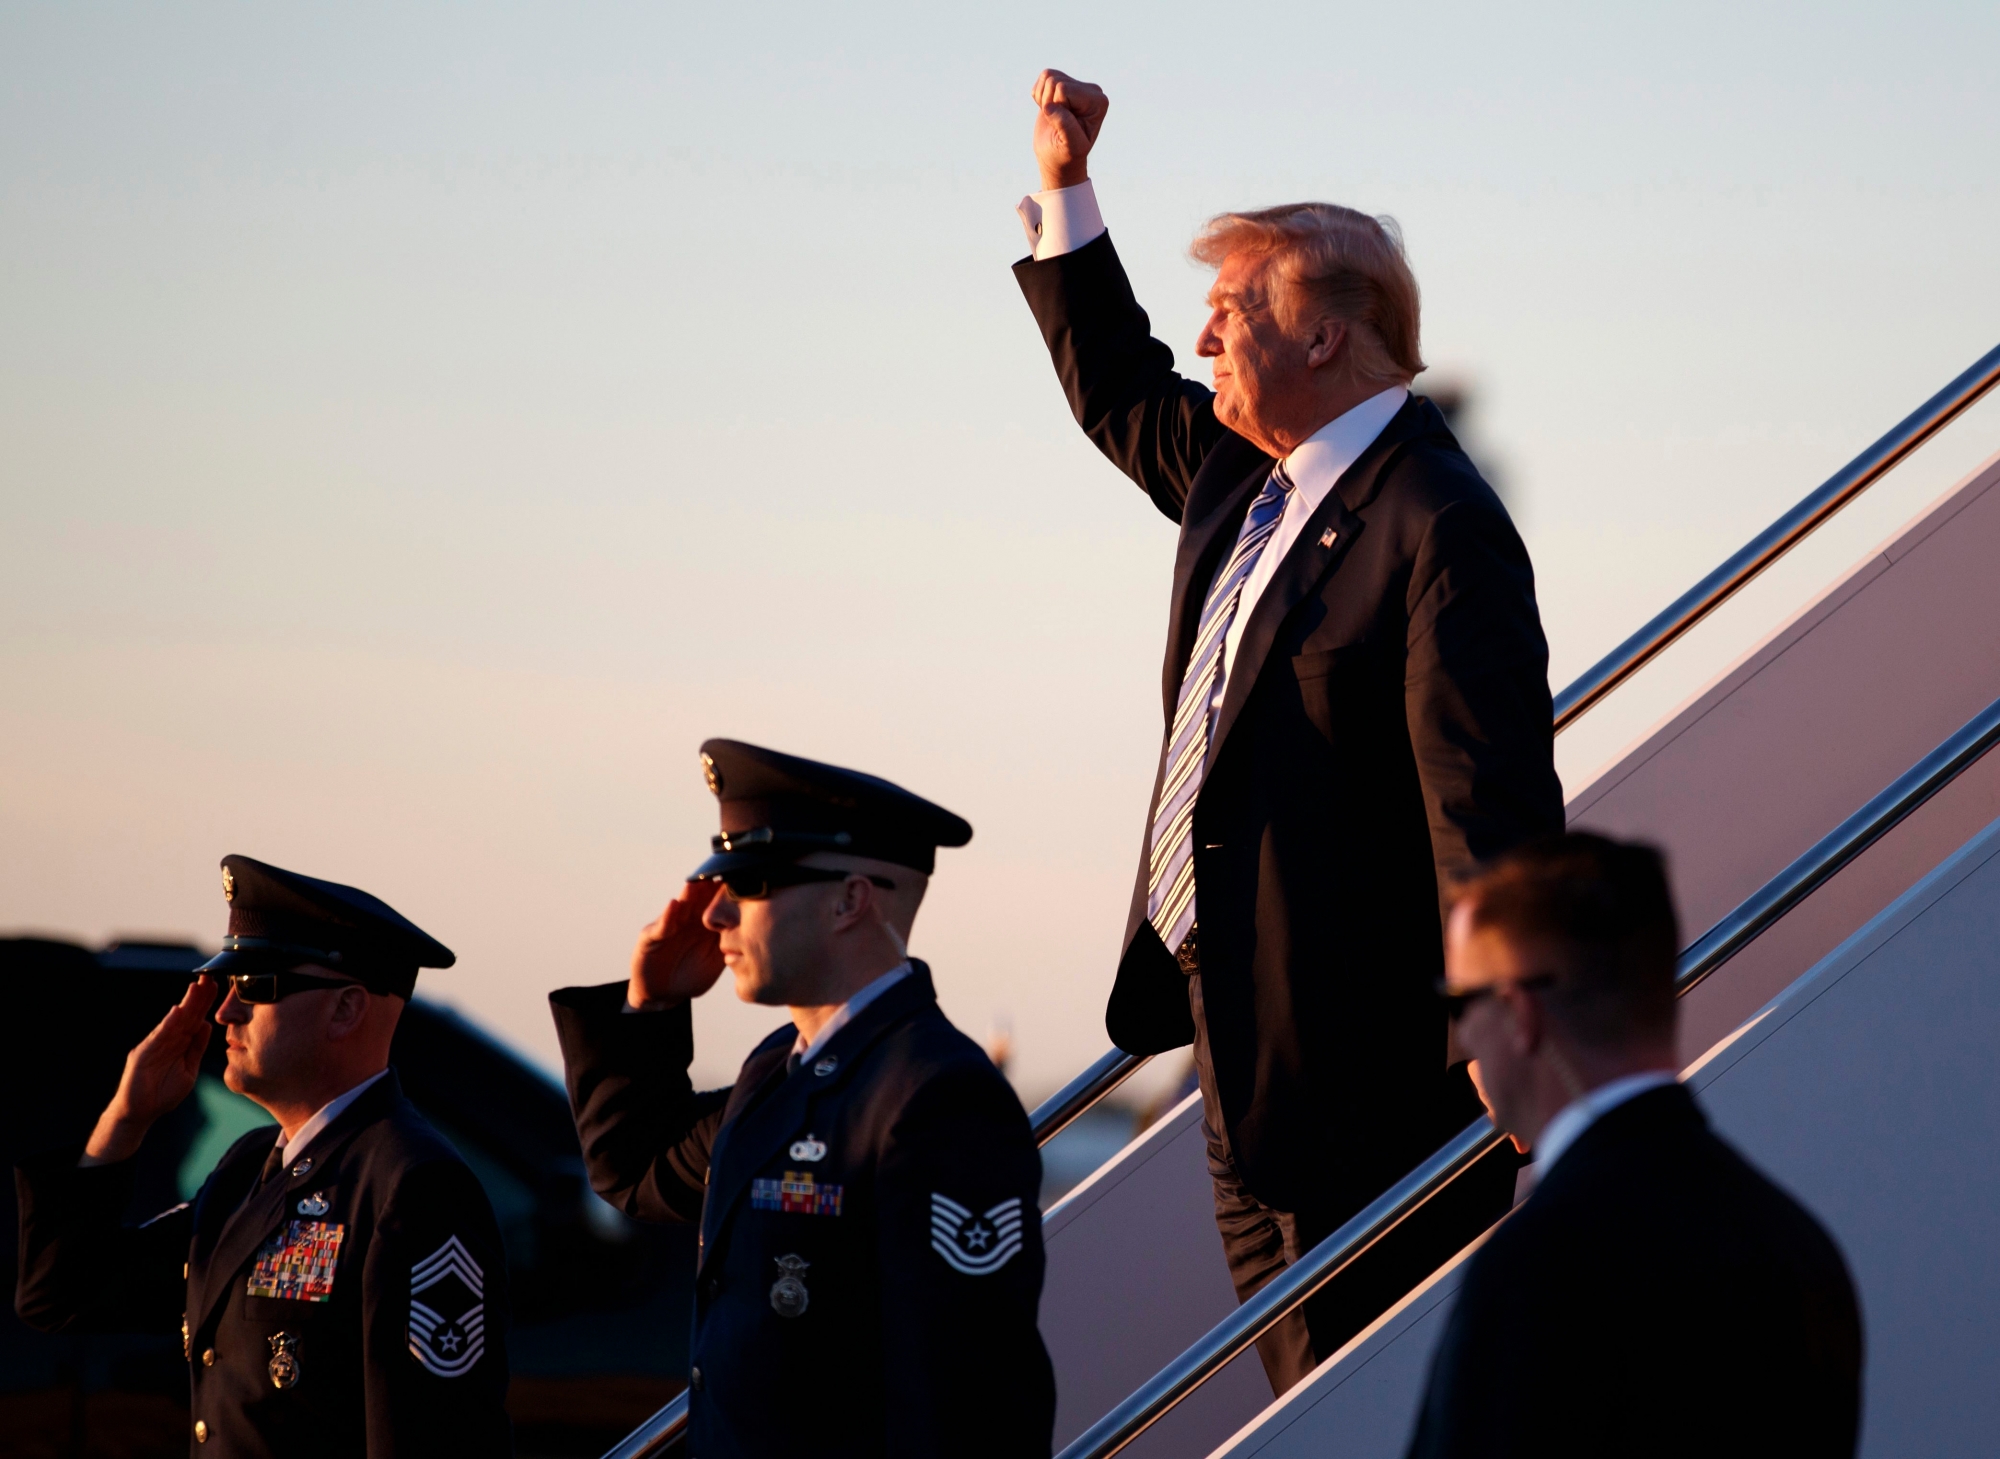 President Donald Trump gestures to people cheering him across the tarmac as he, arrives on Air Force One with first lady Melania Trump and their son Barron Trump at Palm Beach International Airport, in West Palm Beach, Fla., Friday, March 23, 2018. (AP Photo/Carolyn Kaster) Trump